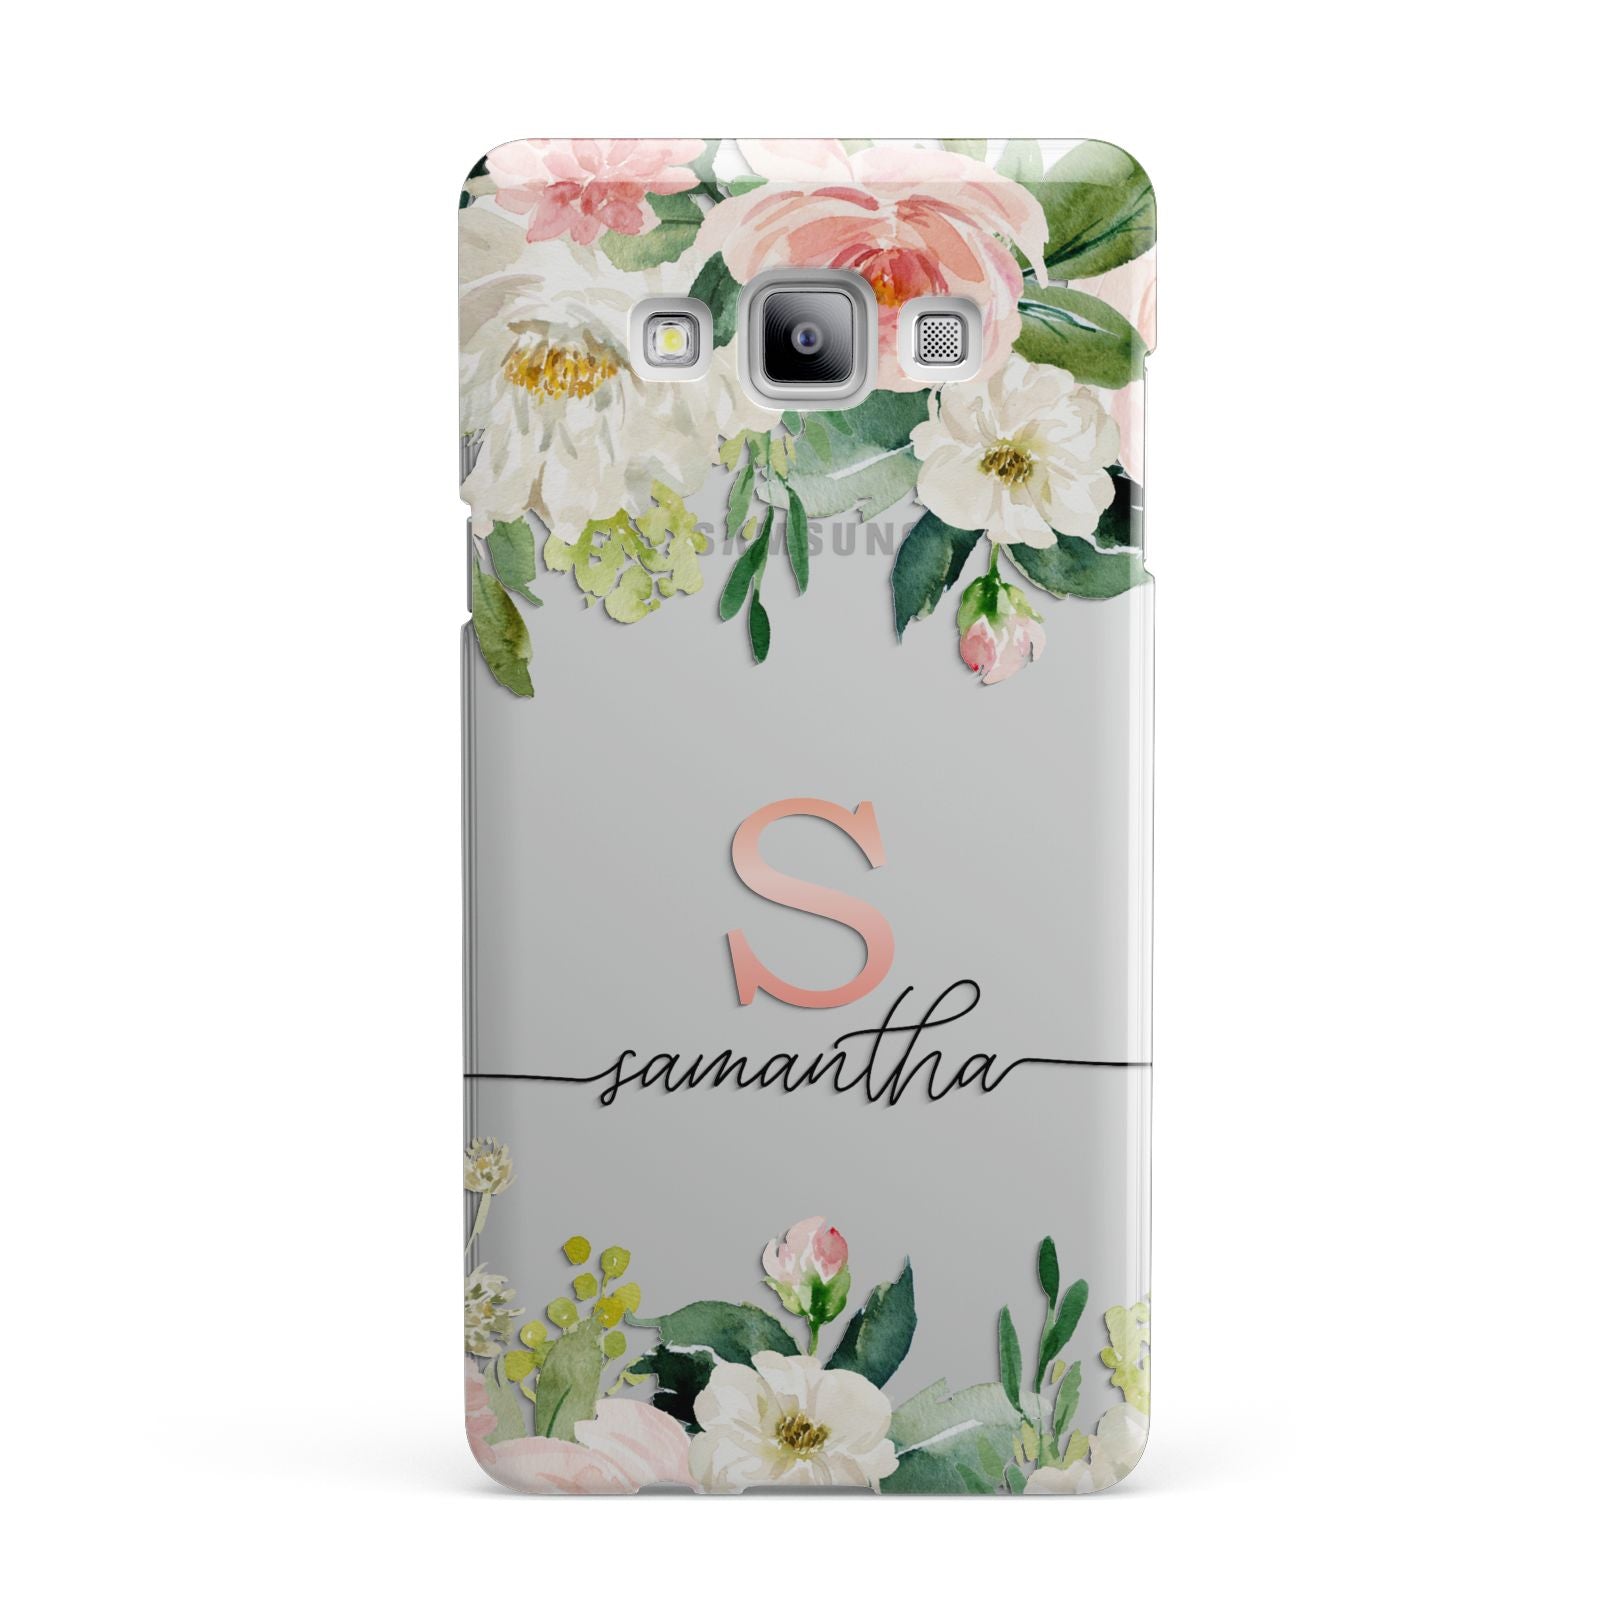 Monogrammed Floral Roses Samsung Galaxy A7 2015 Case